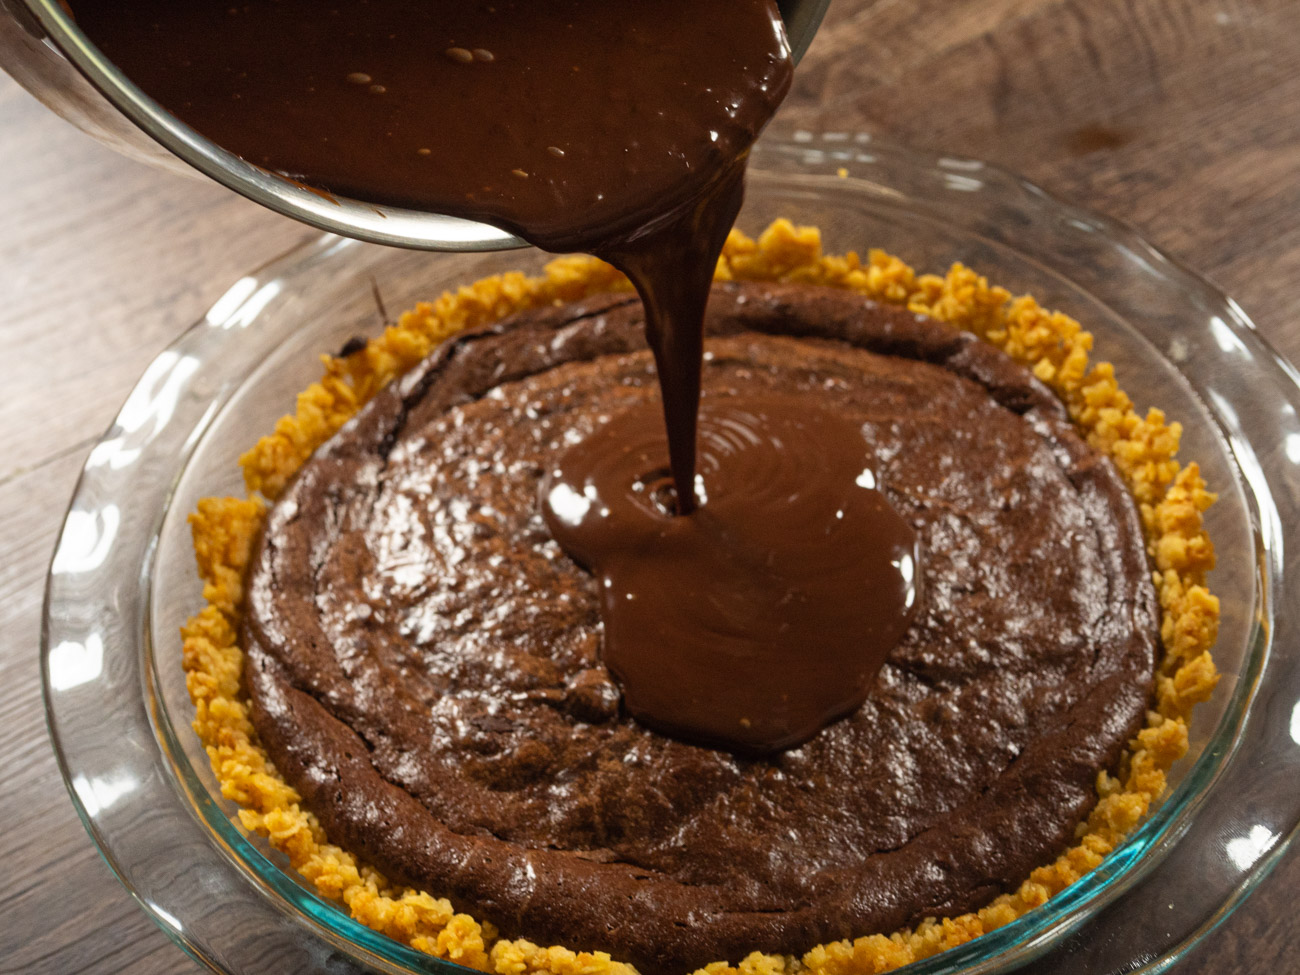 Into a small saucepan pour remaining cream and chocolate chips and stir over medium-low heat until well blended to make the ganache. Do not overheat. Pour ganache over the top of pie. Smooth topping with offset spatula, butter knife, or frosting knife for a level finish.